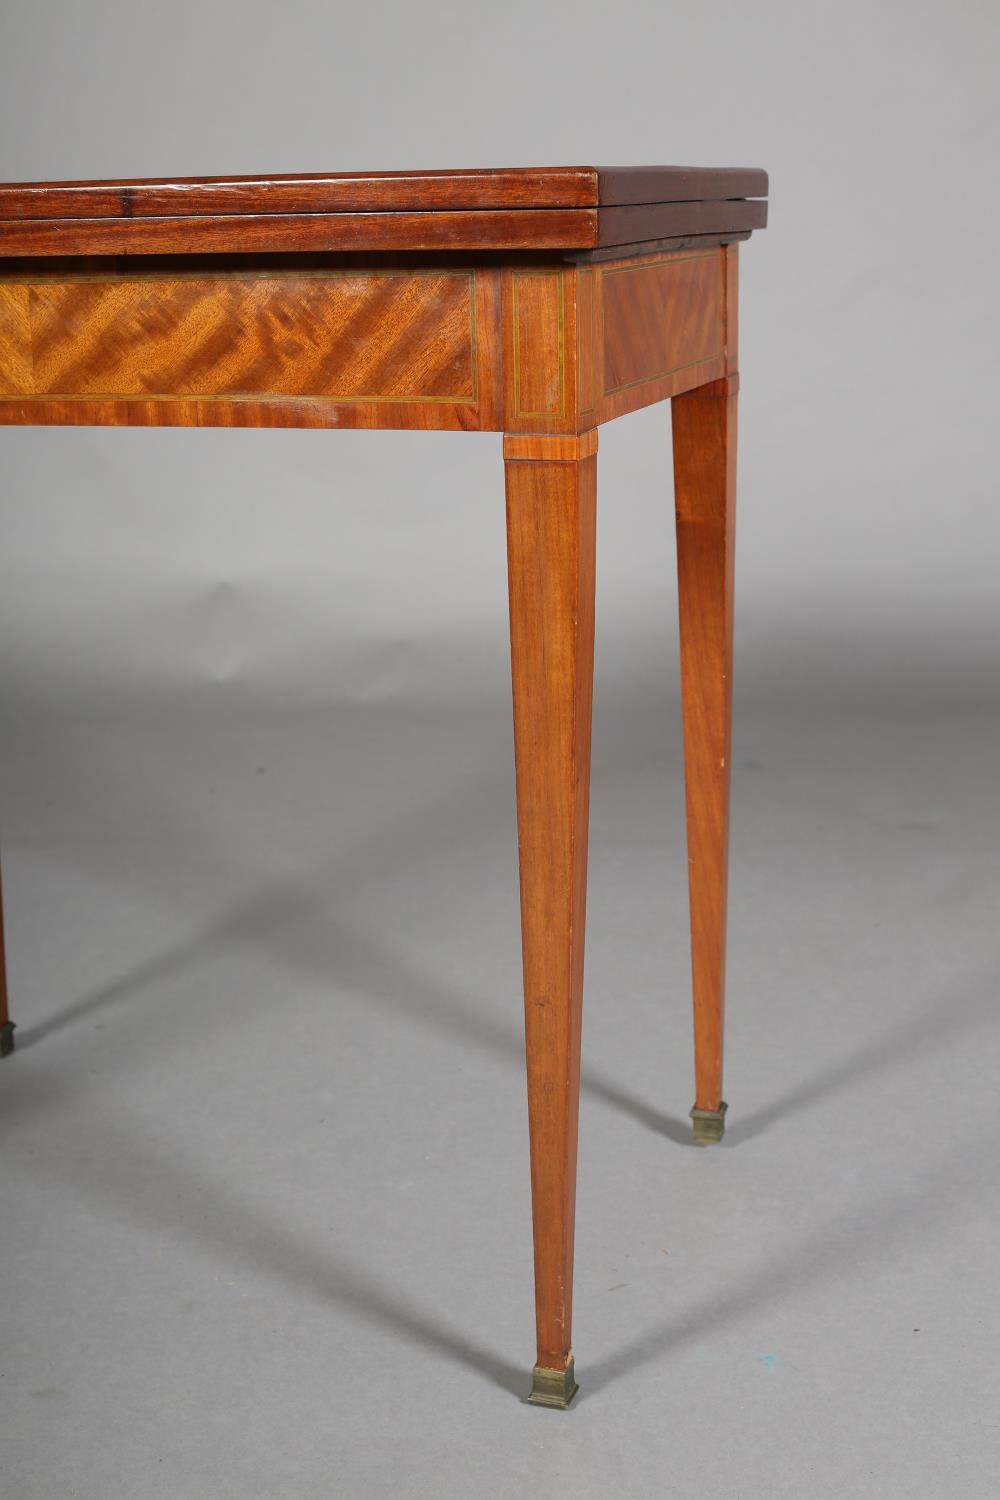 AN EARLY 20TH CENTURY MAHOGANY AND SATIN WALNUT PARQUETRY CARD, WRITING AND DRESSING TABLE inlaid - Image 3 of 10